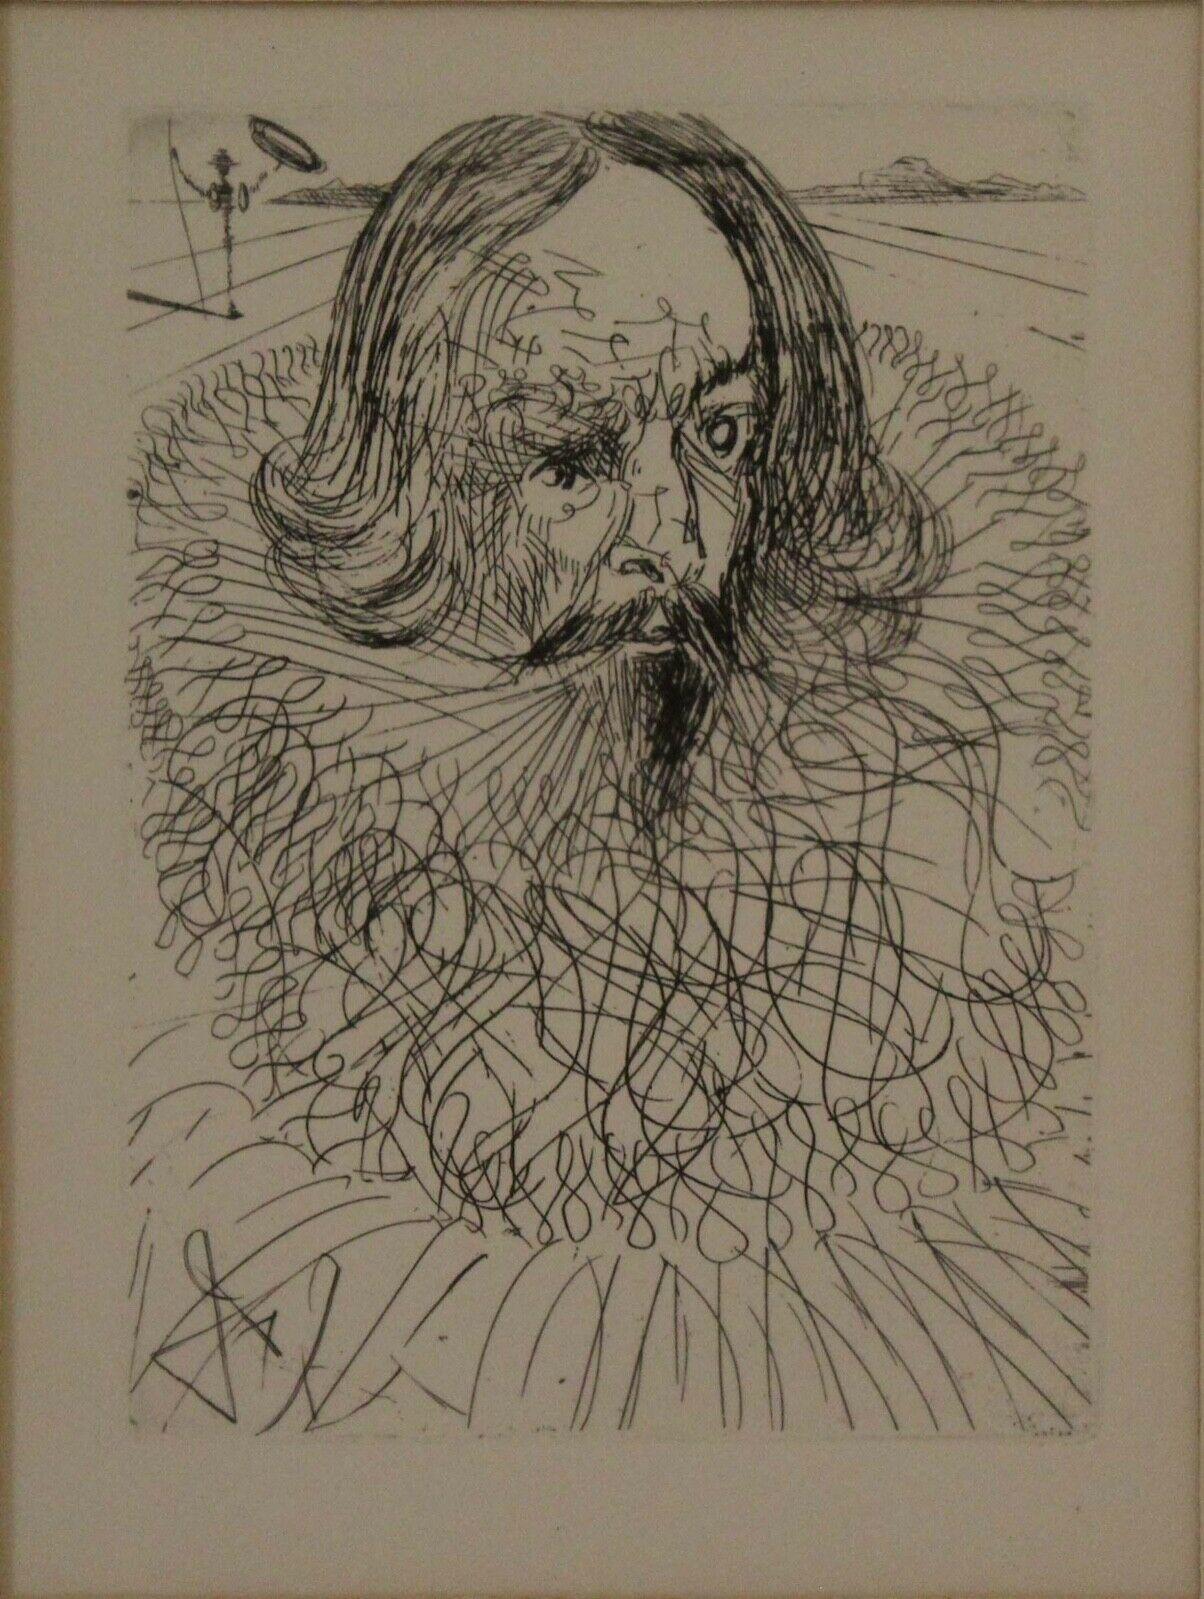 Le Shoppe Too in Michigan is offering an exquisite etching titled Cervantes by Spanish surrealist artist Salvador Dali. In the subject of Cervantes, Salvador Dali has captured the nobility and grandeur of the great author. From his Spanish Immortals